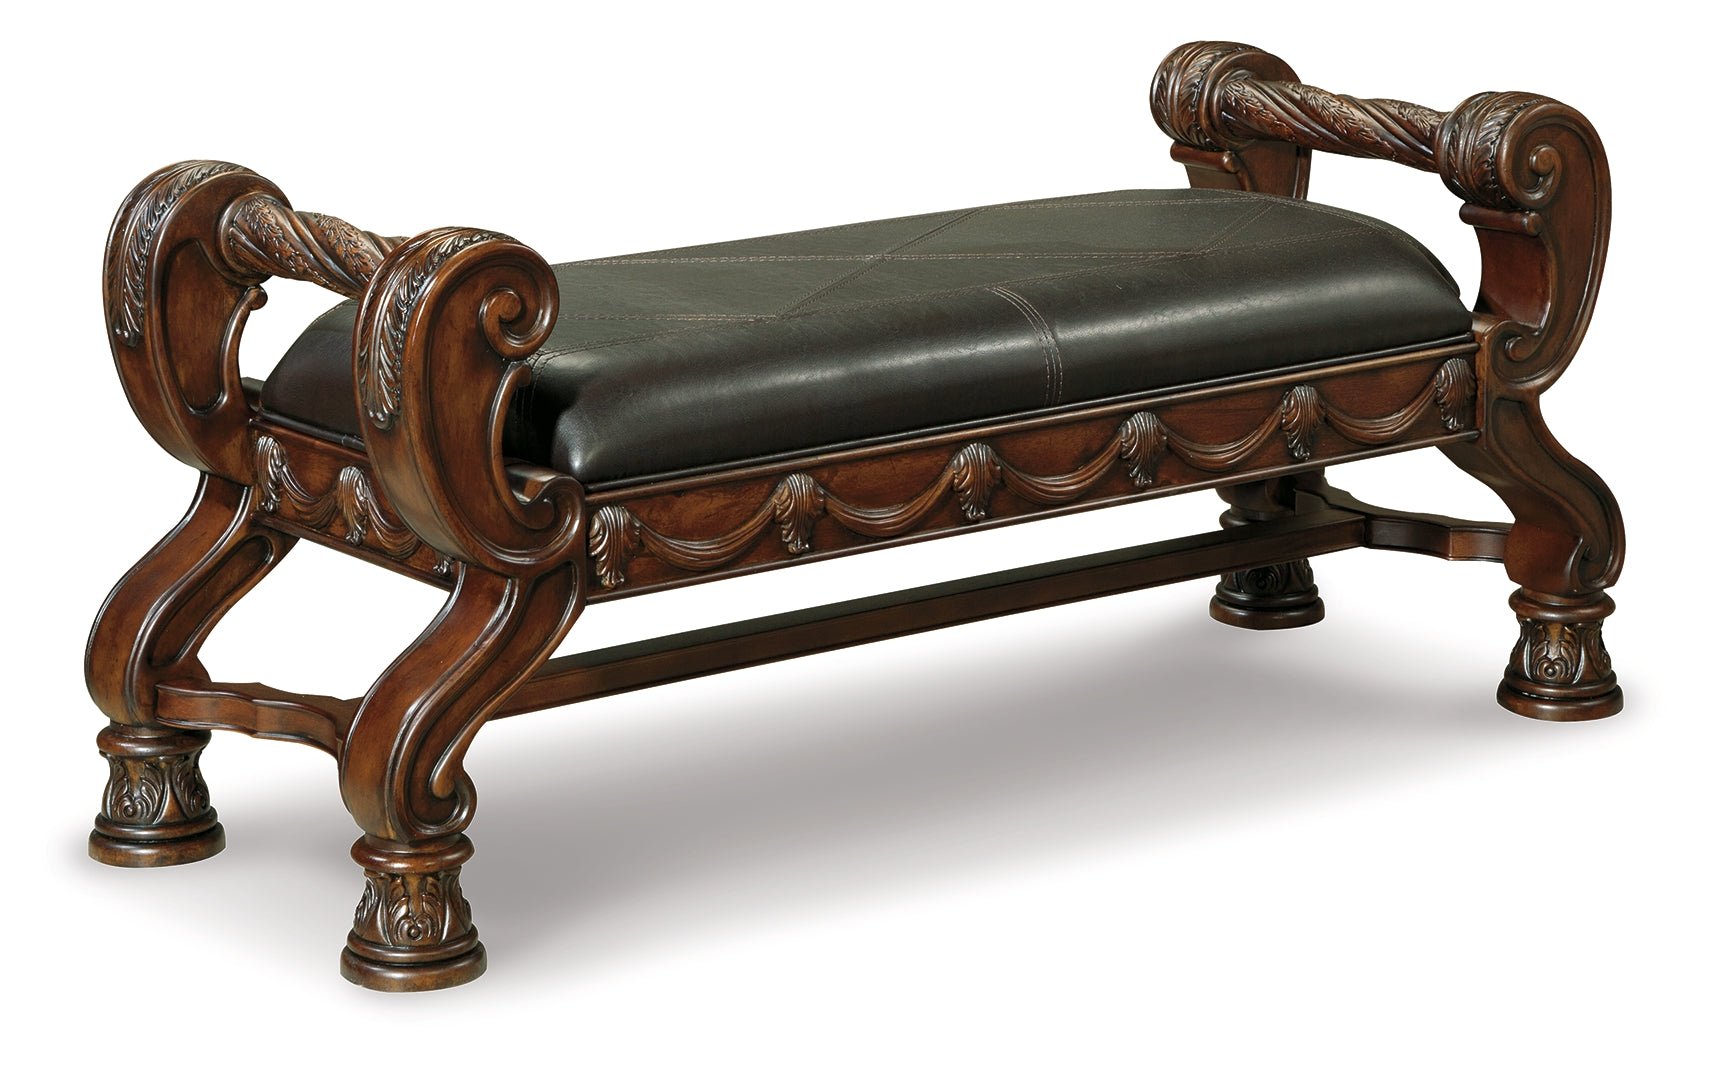 North Shore Upholstered Bench